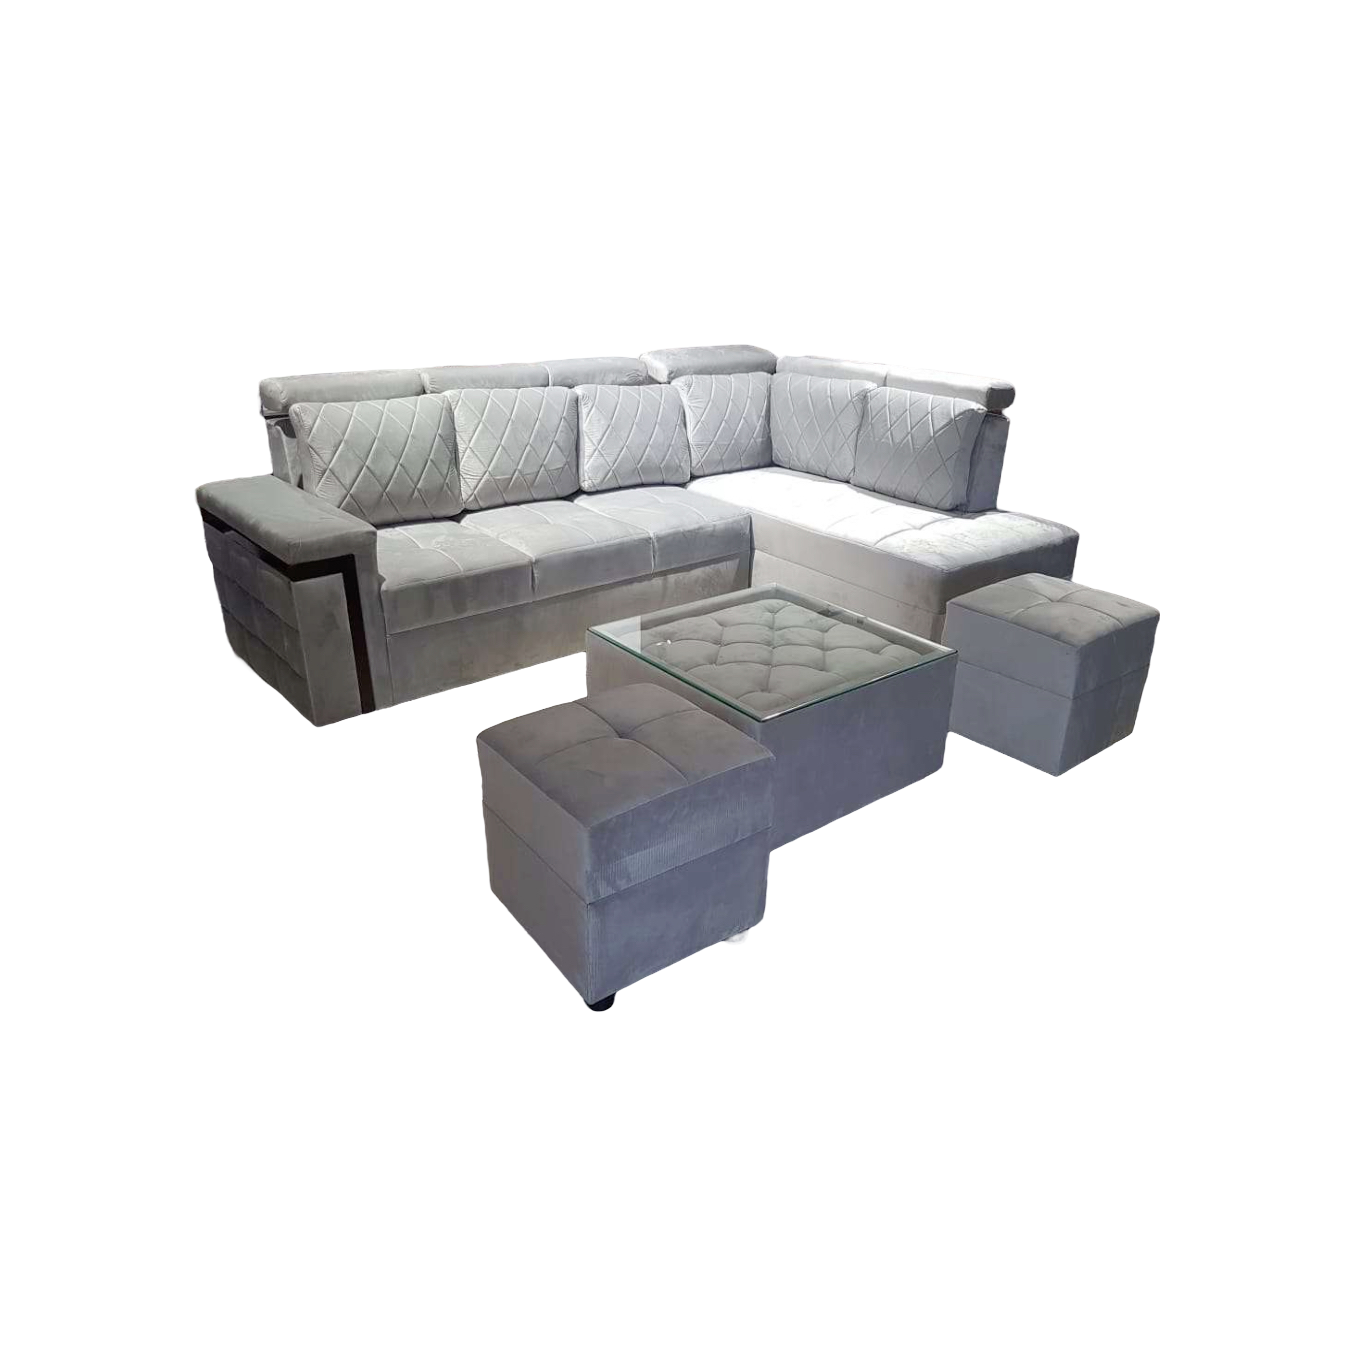 Comfort castle Walmart lounger corner sofa with centre table and 2 puffs